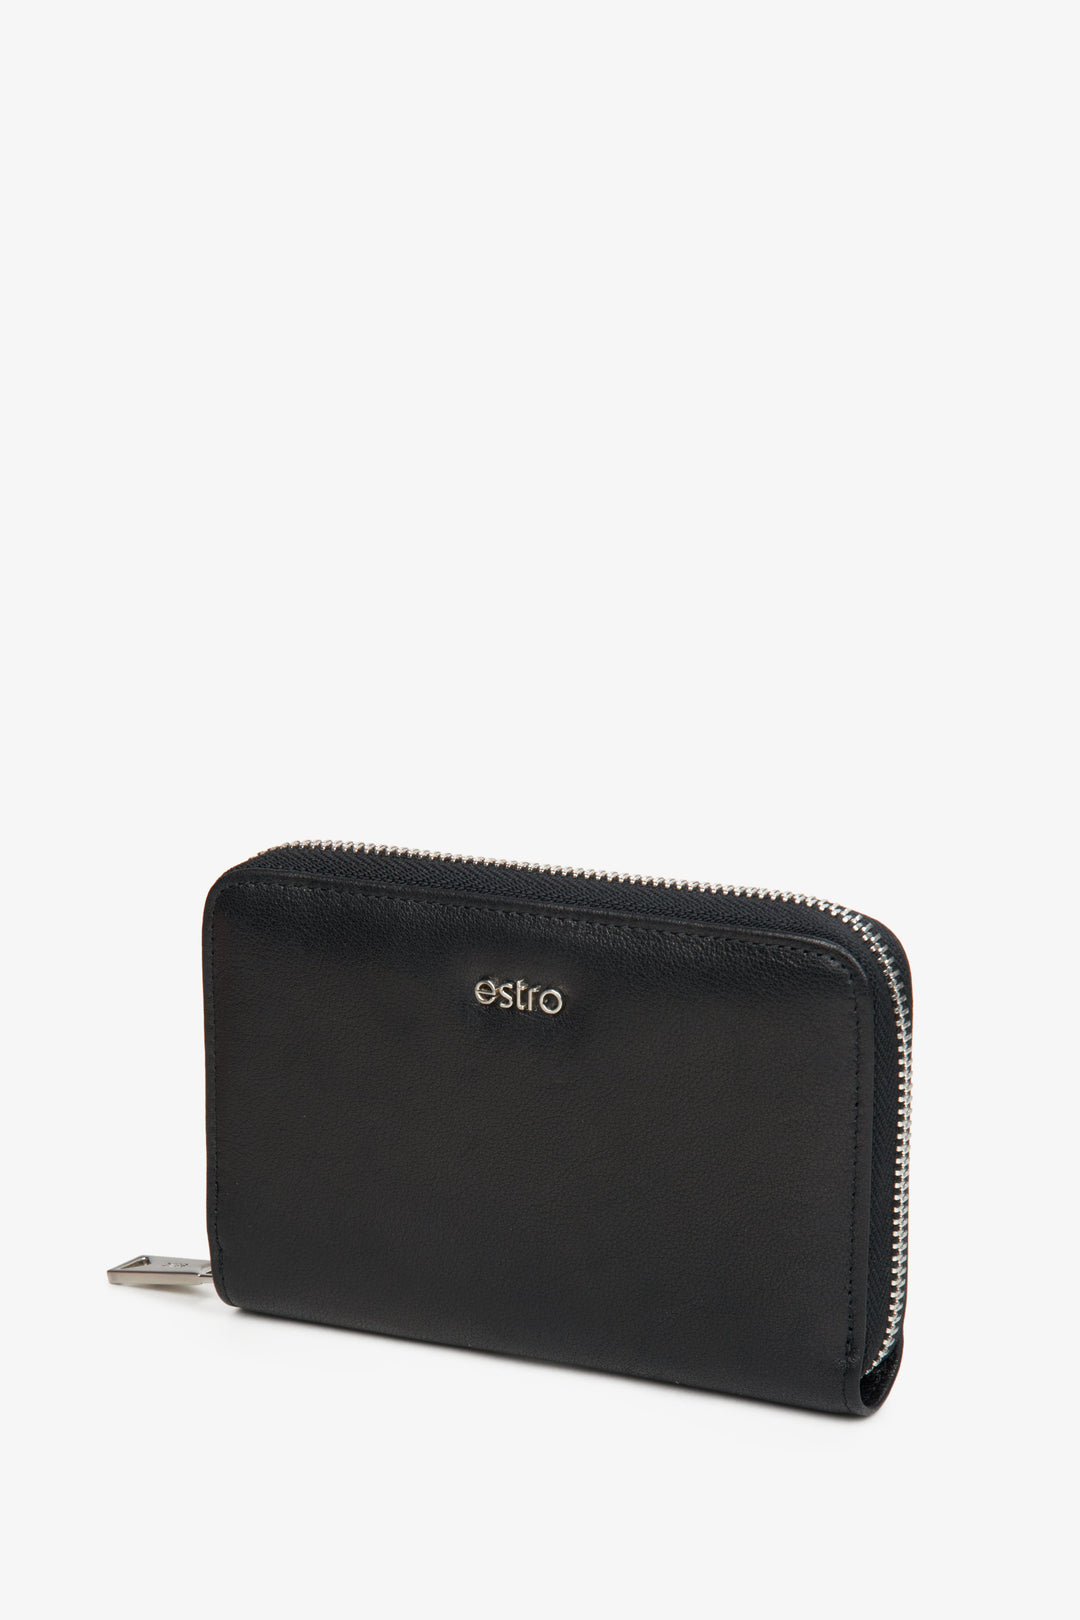 Convenient men's black wallet made of genuine leather.